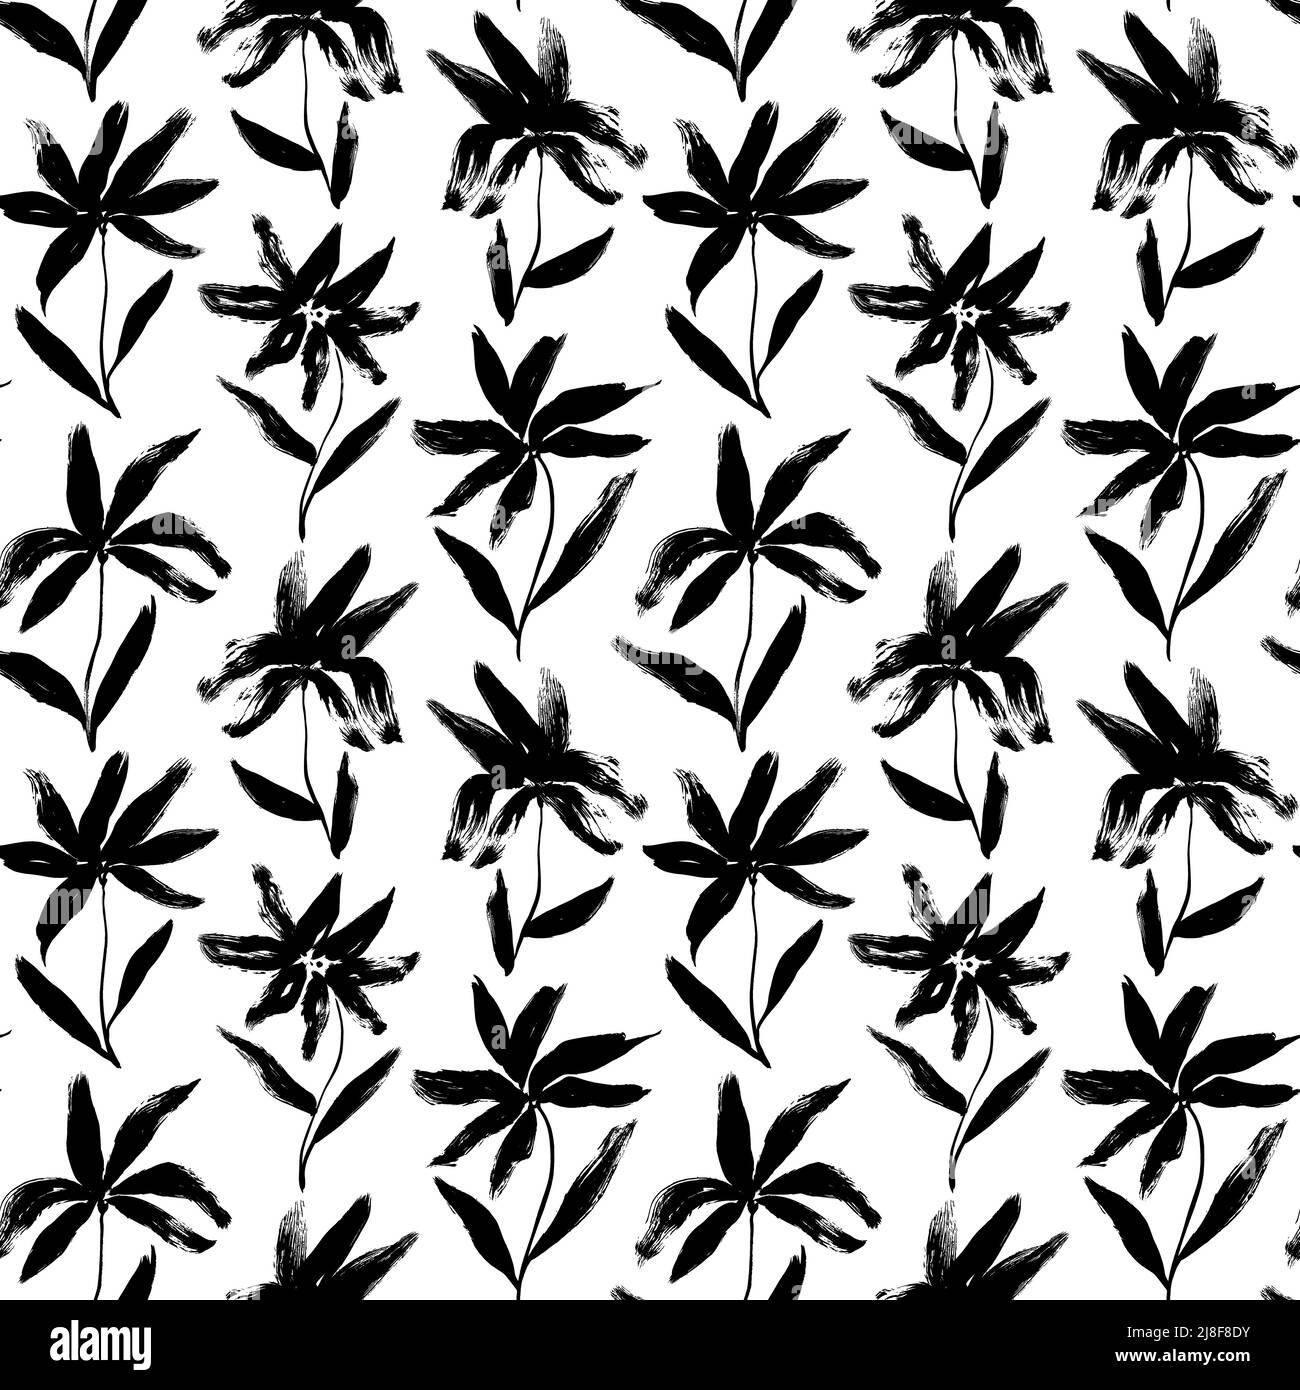 Hand drawn narcissus and lily seamless pattern. Stock Vector